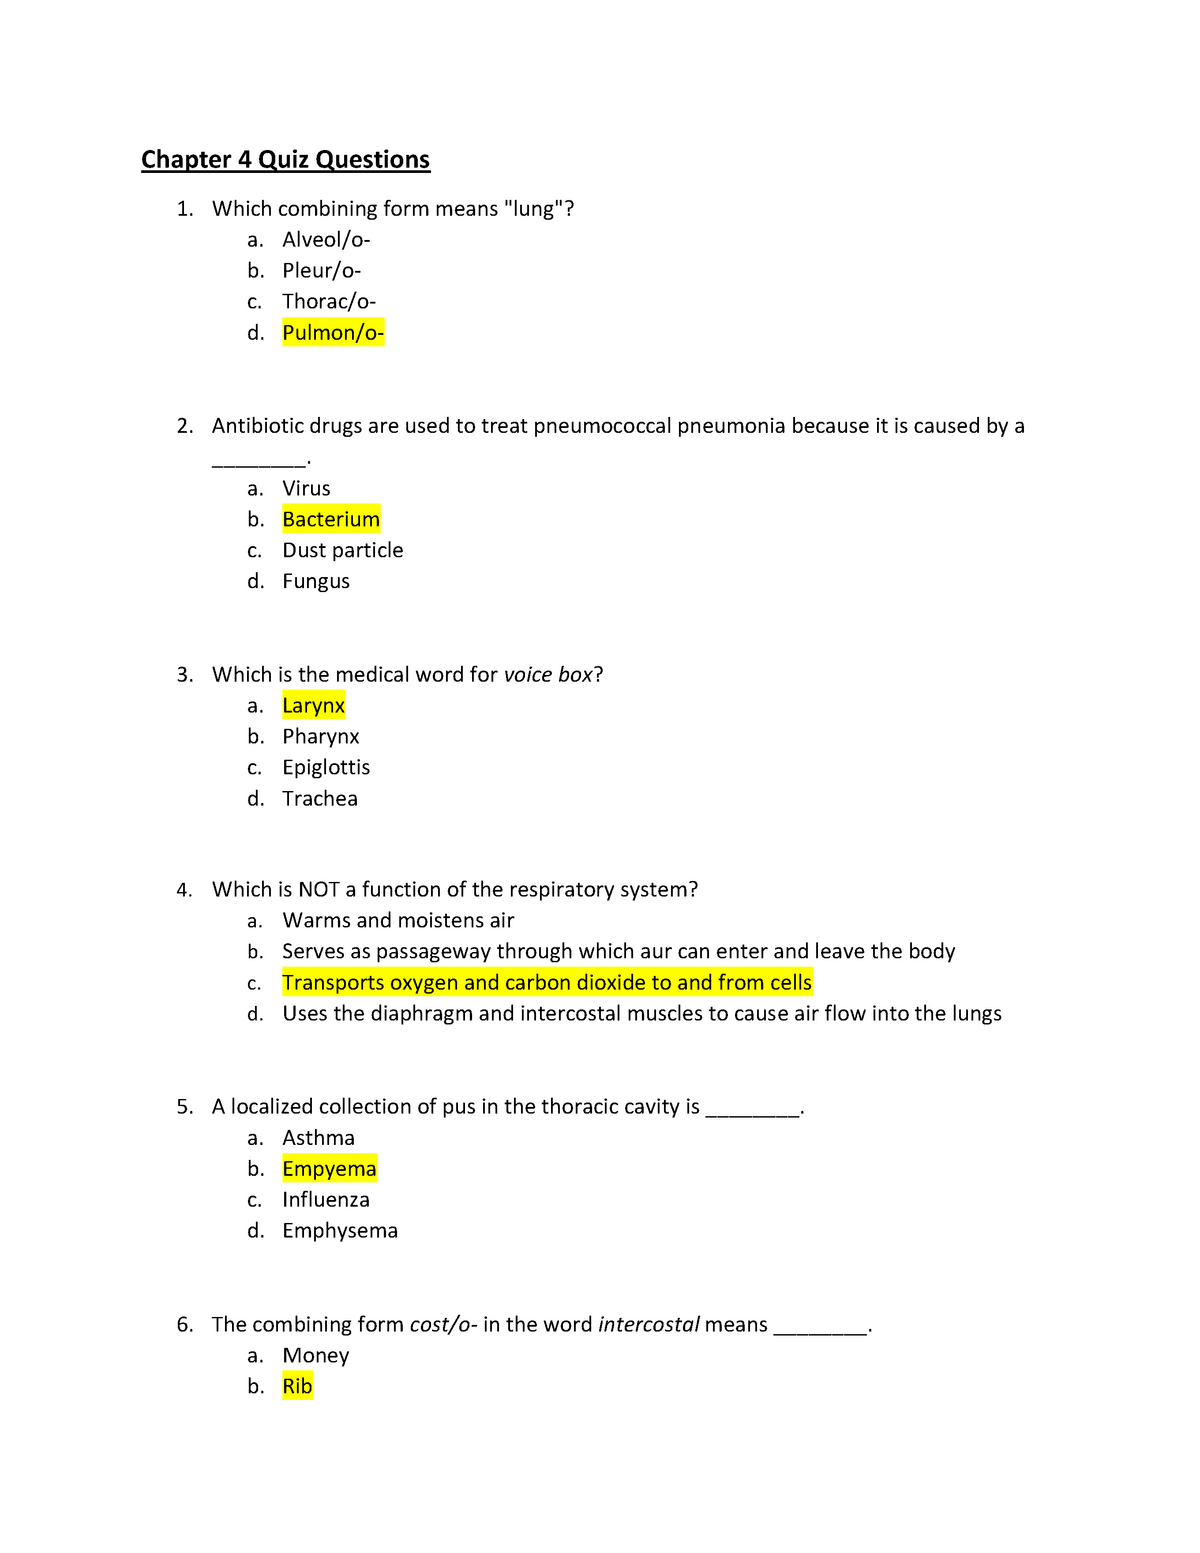 Chapter 4 medical terminology answers